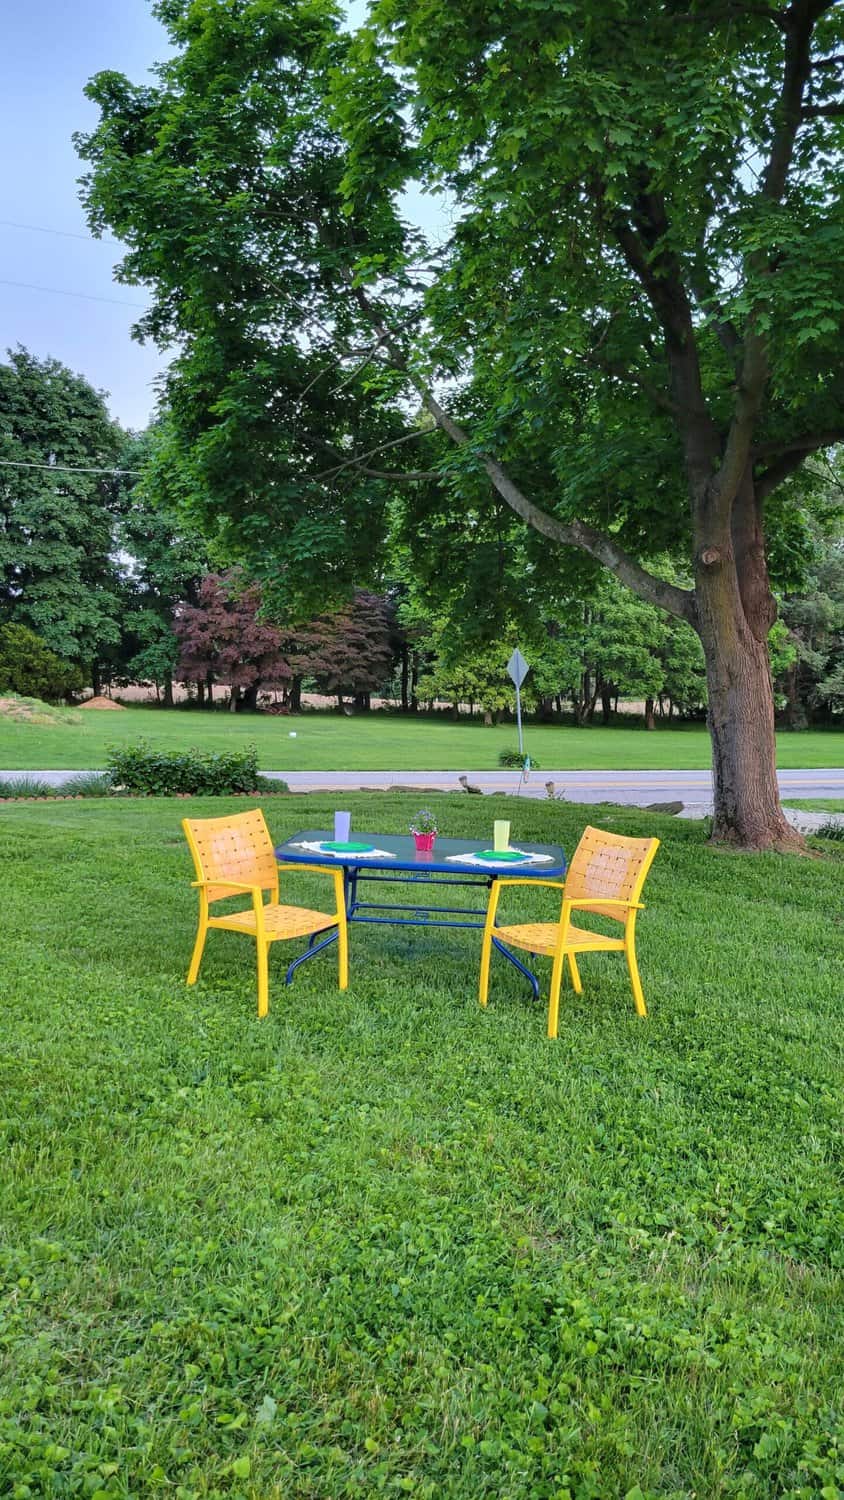 painted yellow and blue patio furniture